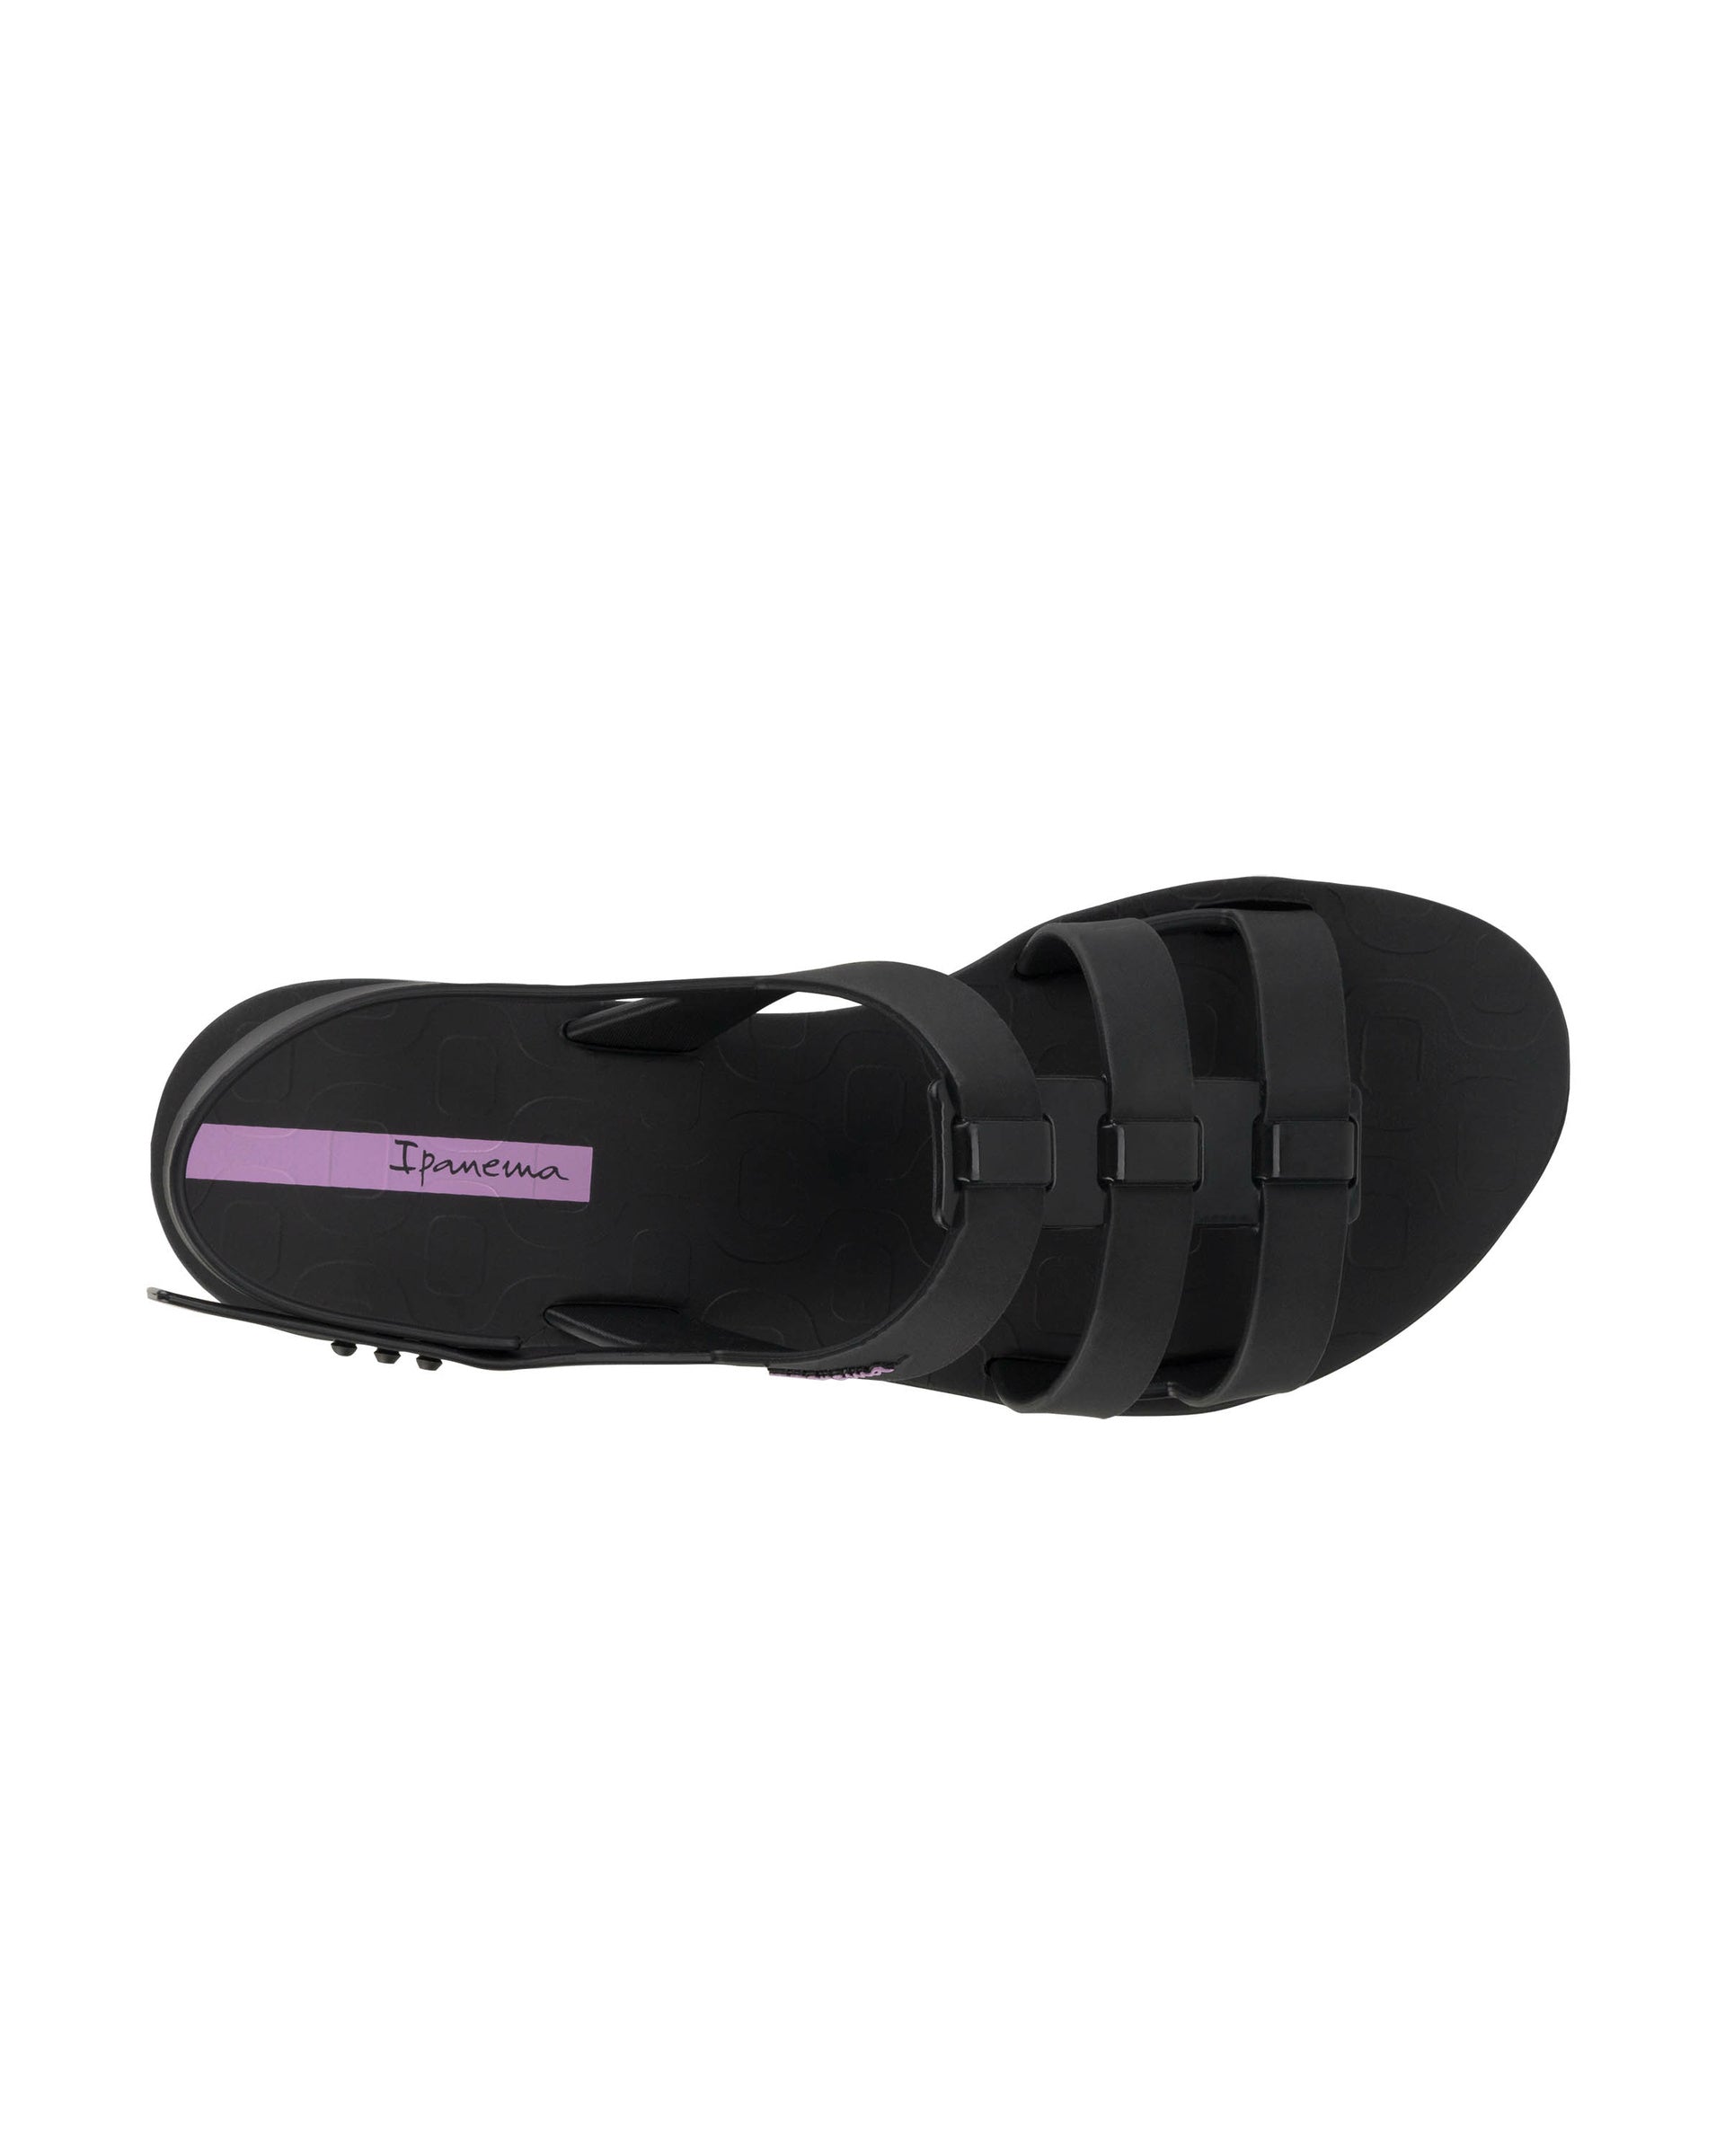 Top view of a black Ipanema Style women's sandal.